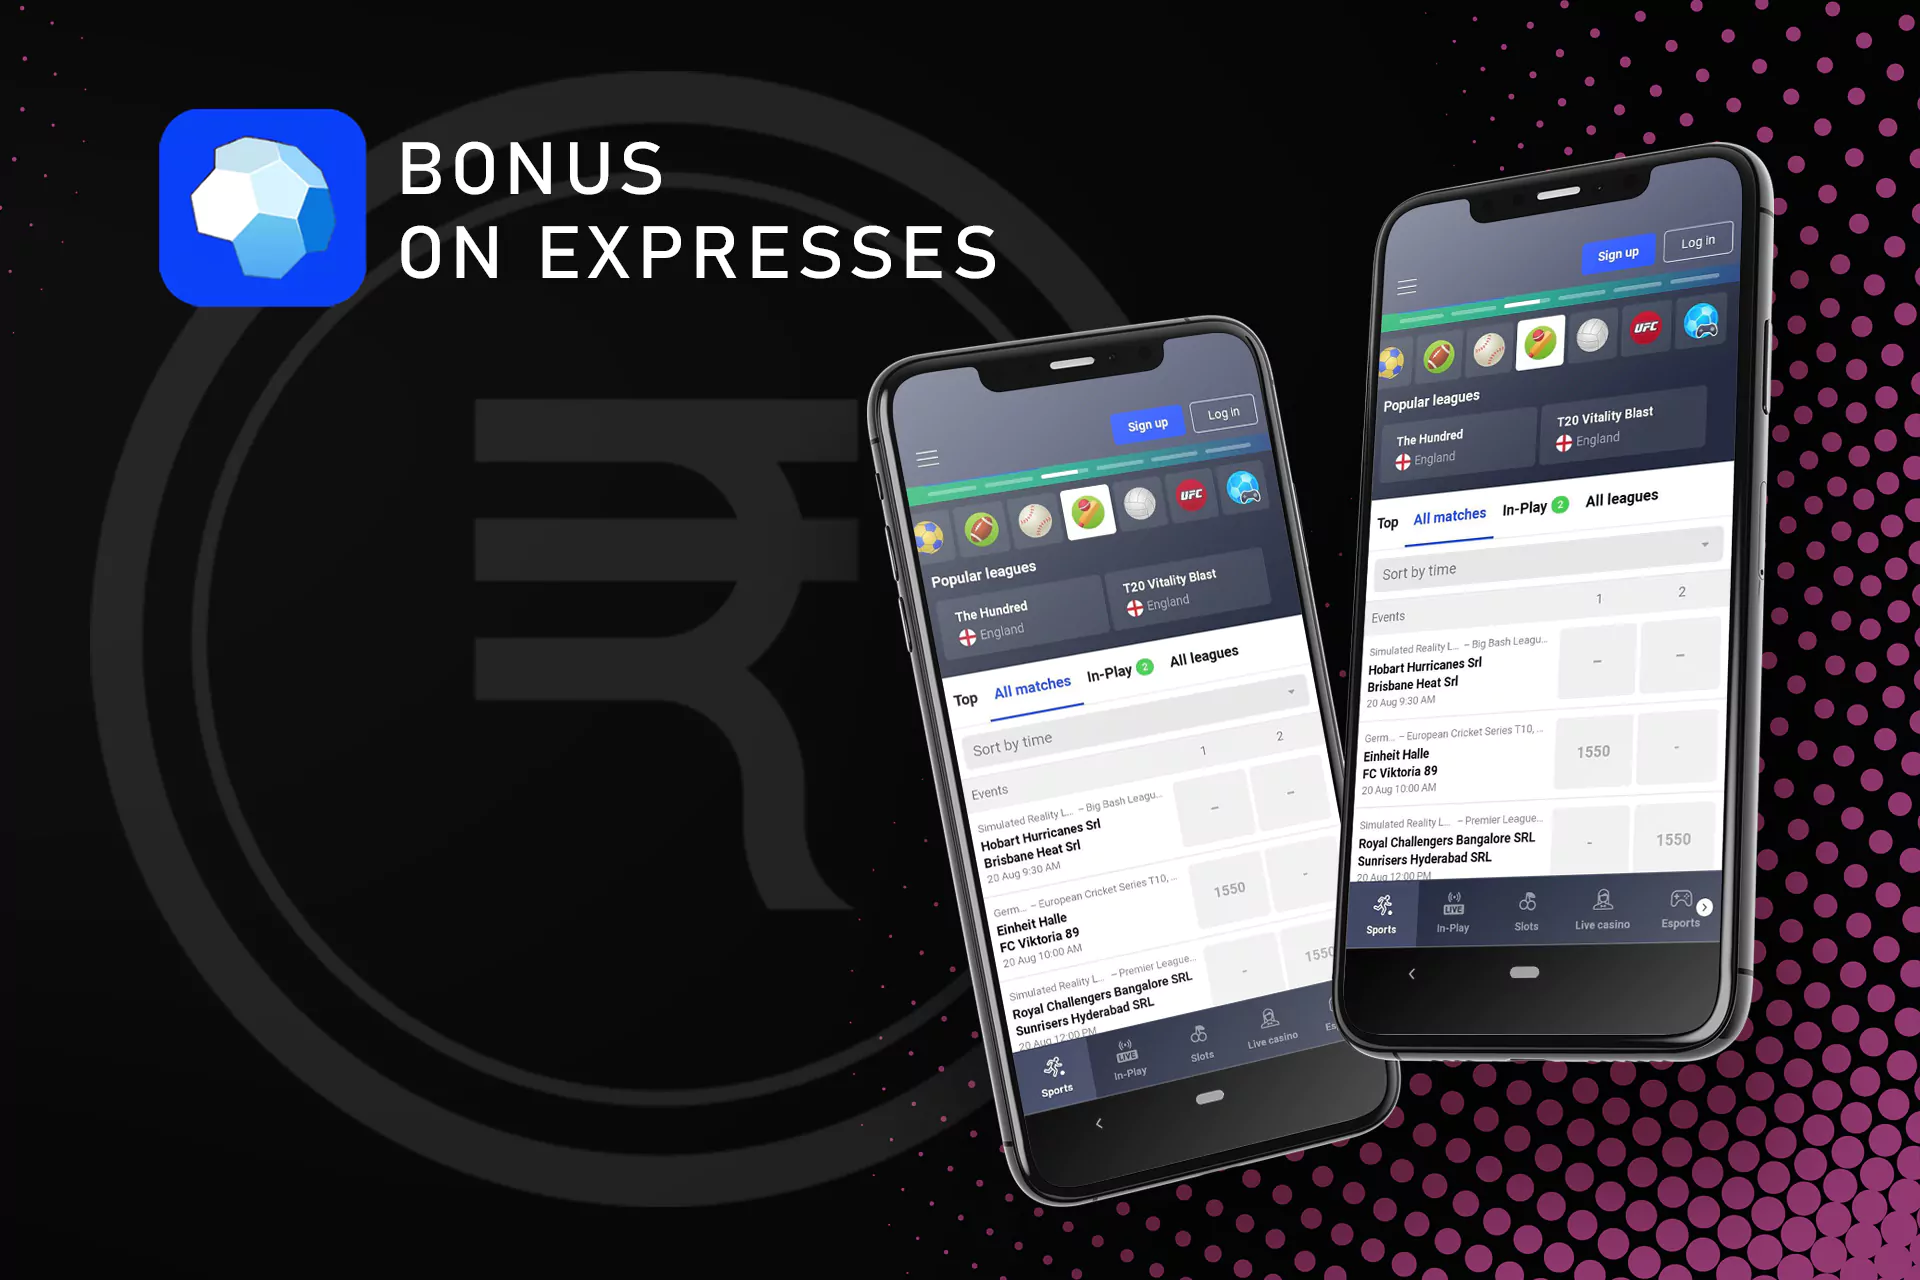 Betmaster also provides users special bonuses on expresses.